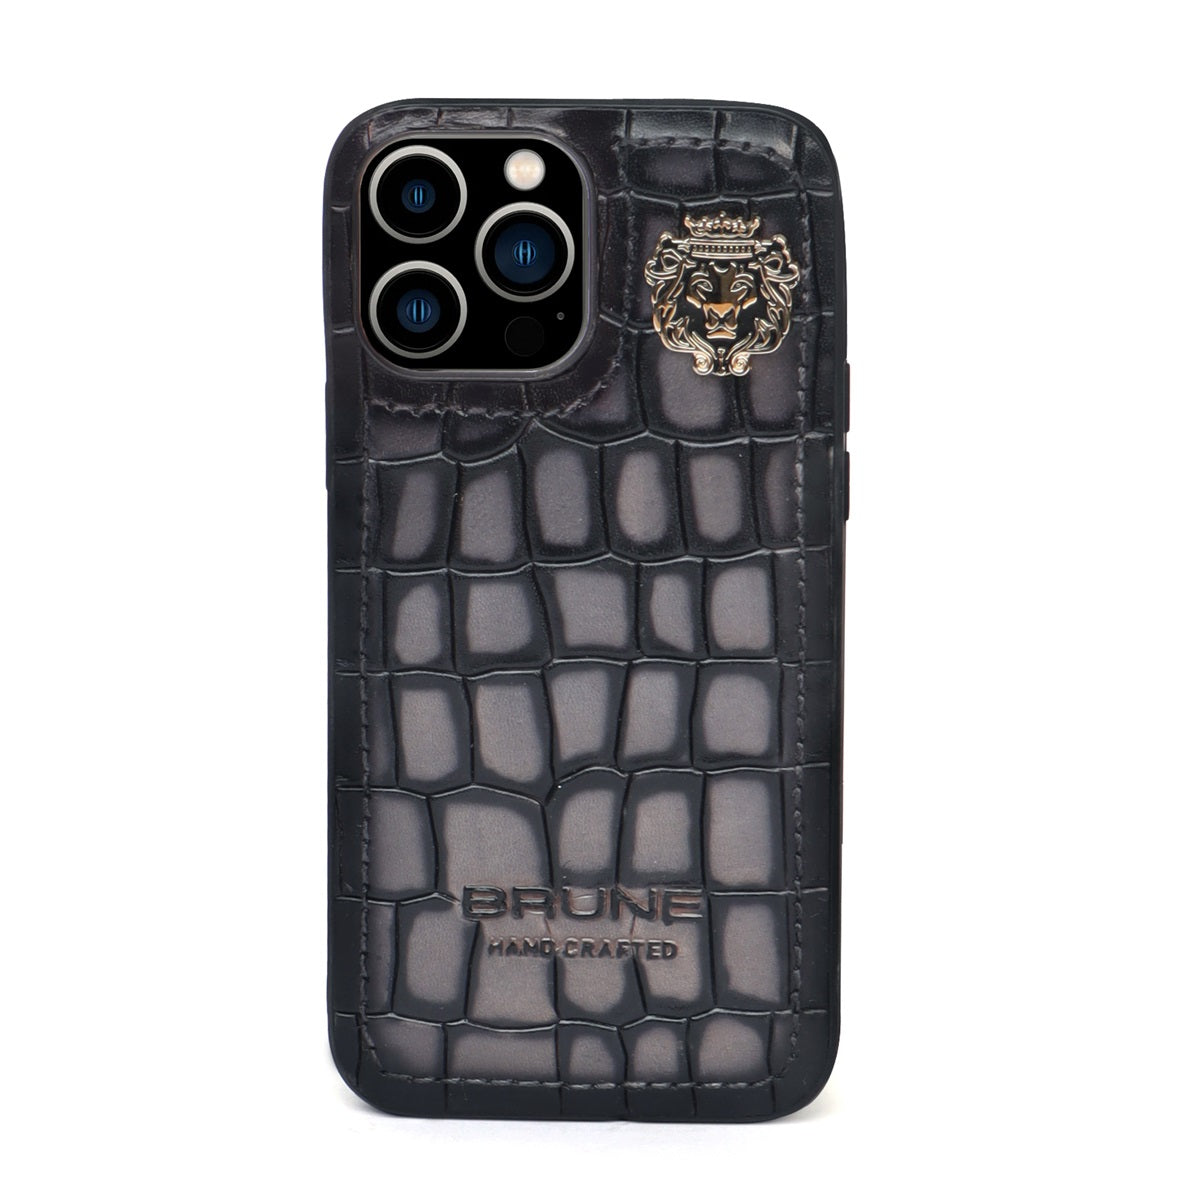 Smokey Grey Deep Cut Leather Mobile Cover by Brune & Bareskin